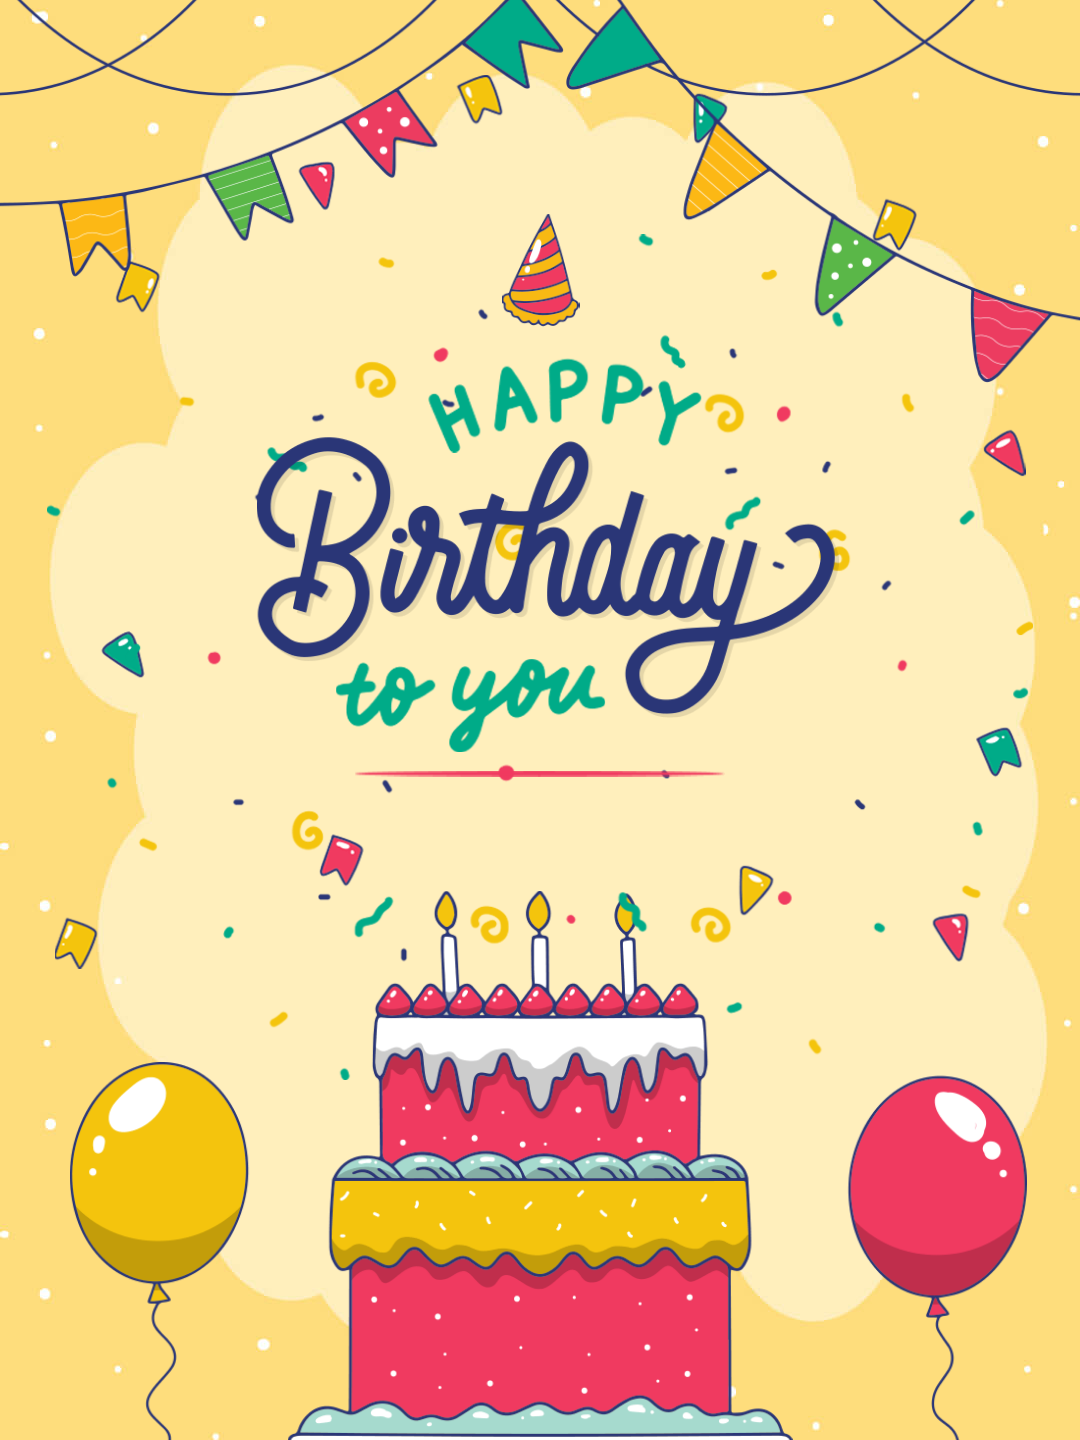 Happy Birthday Templates Sayings, Posters Wishes Messages | Best Wishes